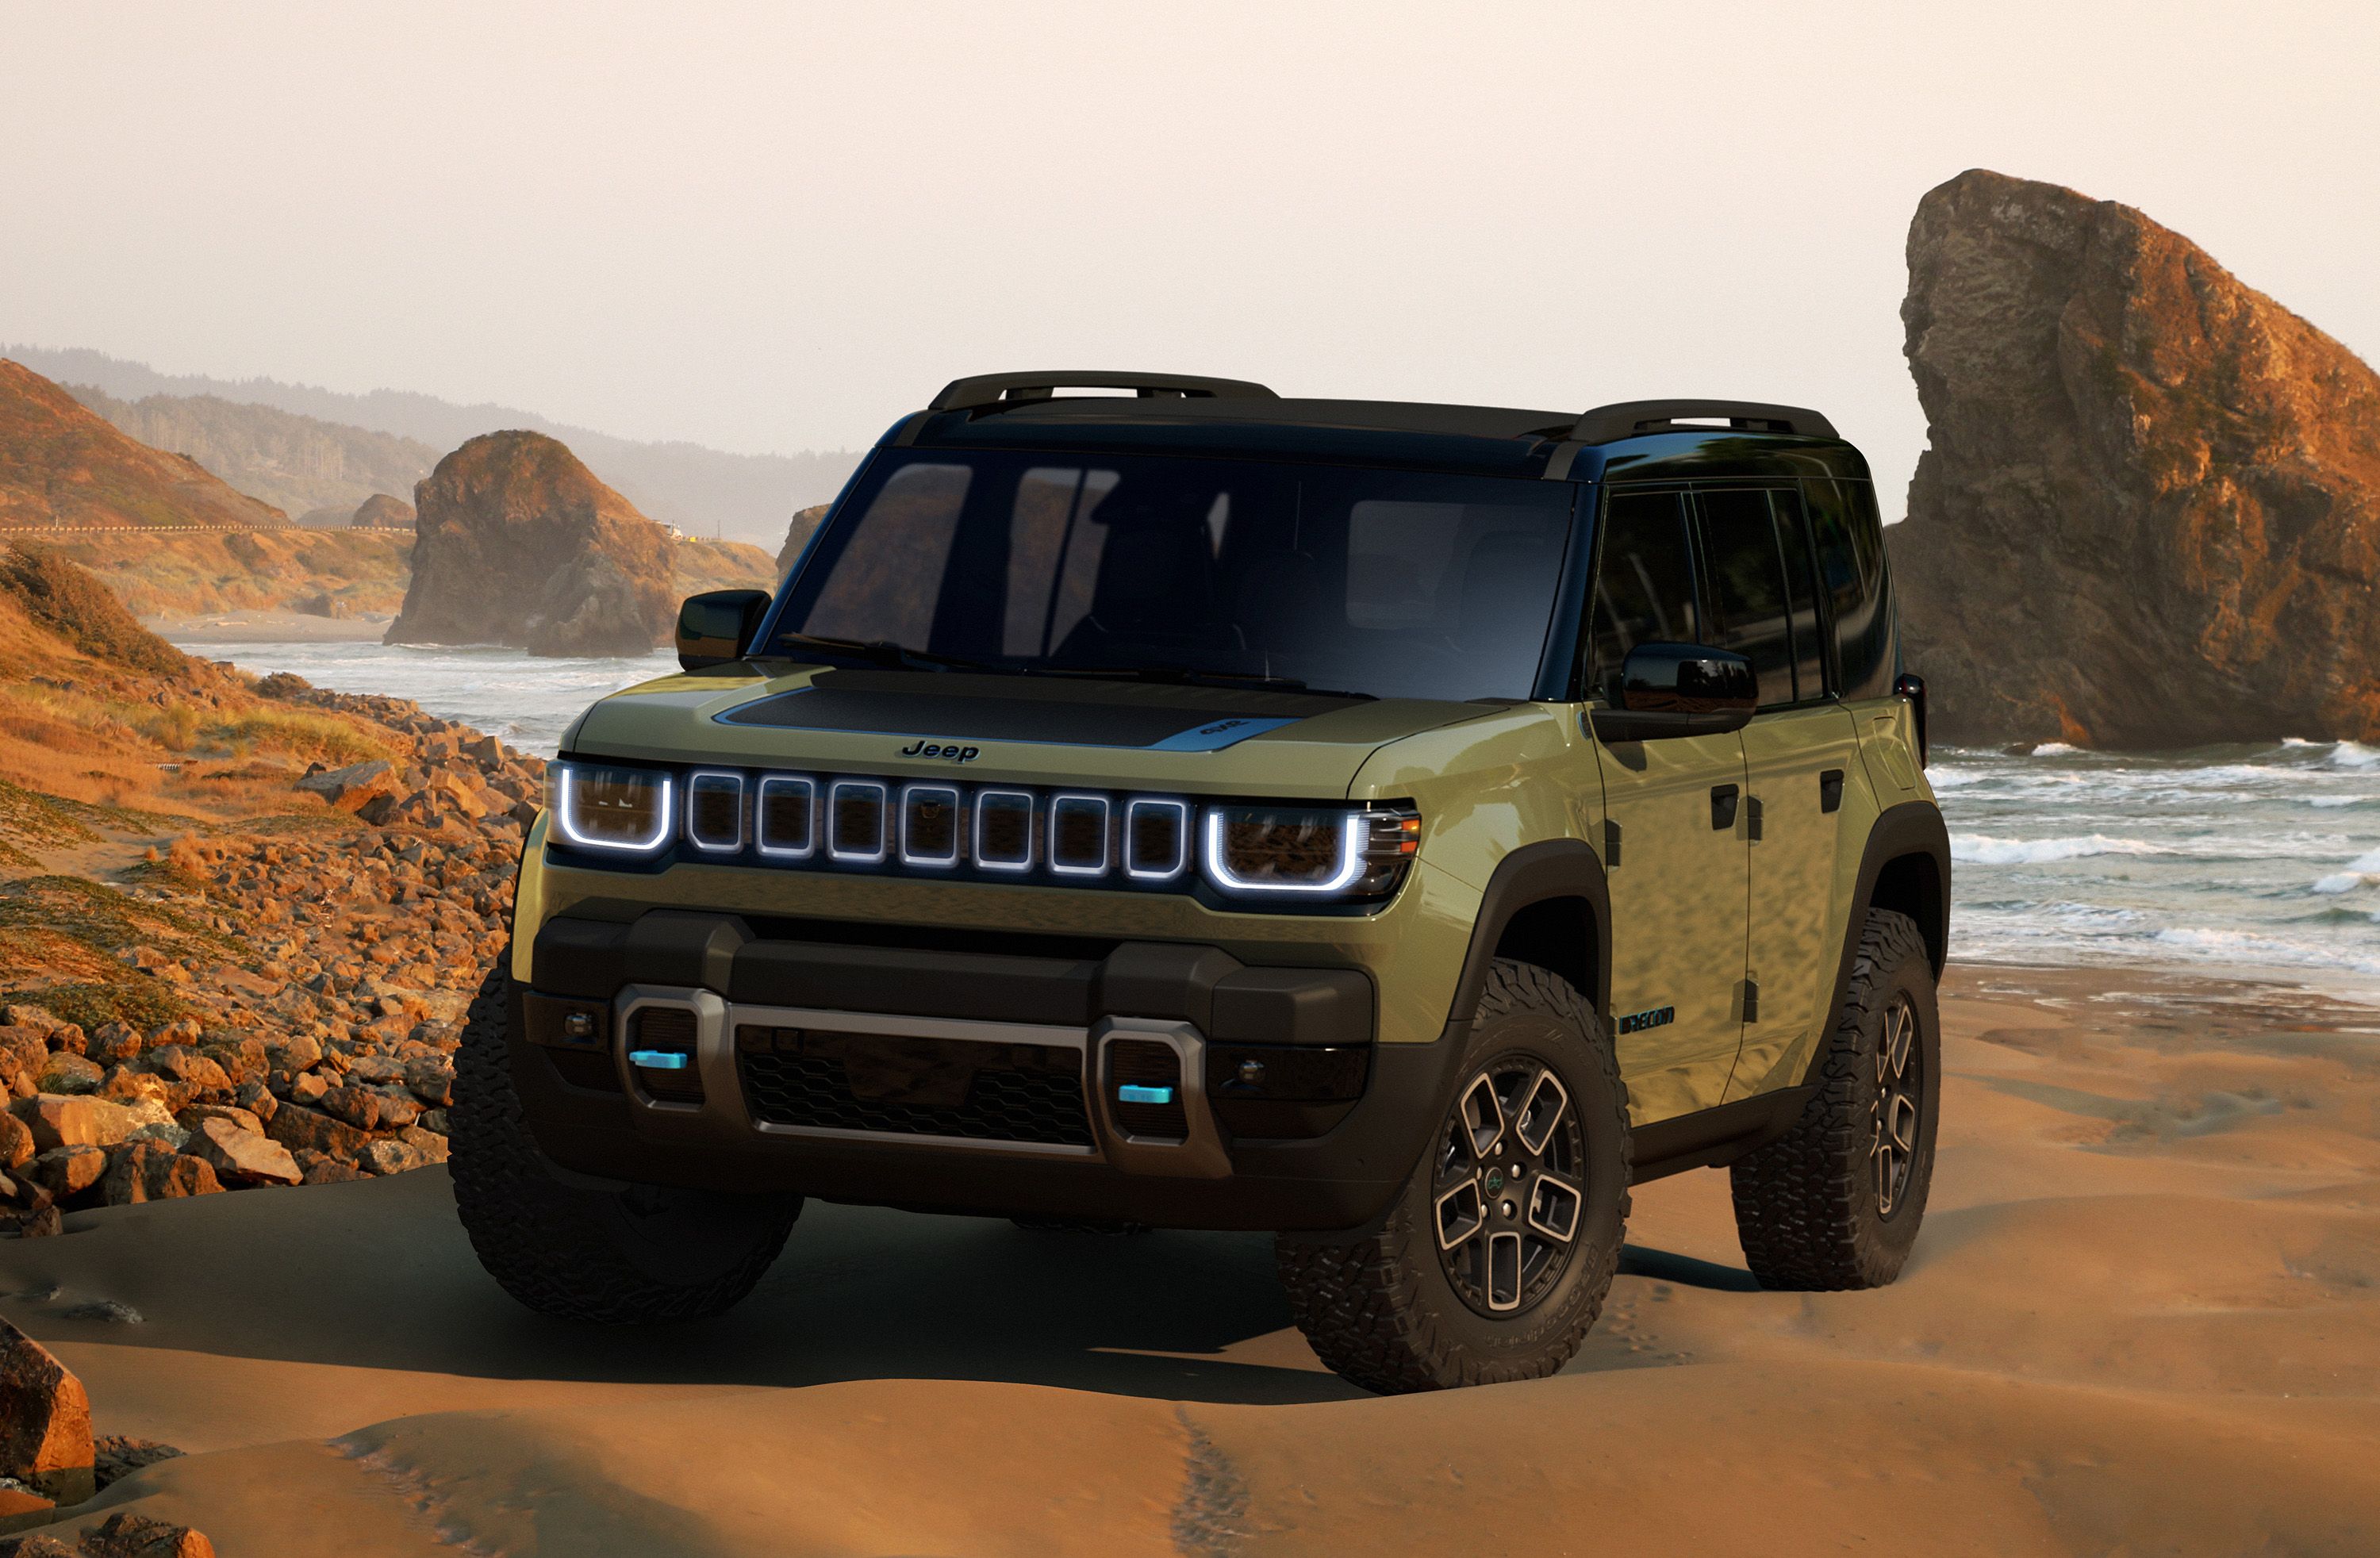 The Complete Jeep Buying Guide: Finding the Best New Jeep for You